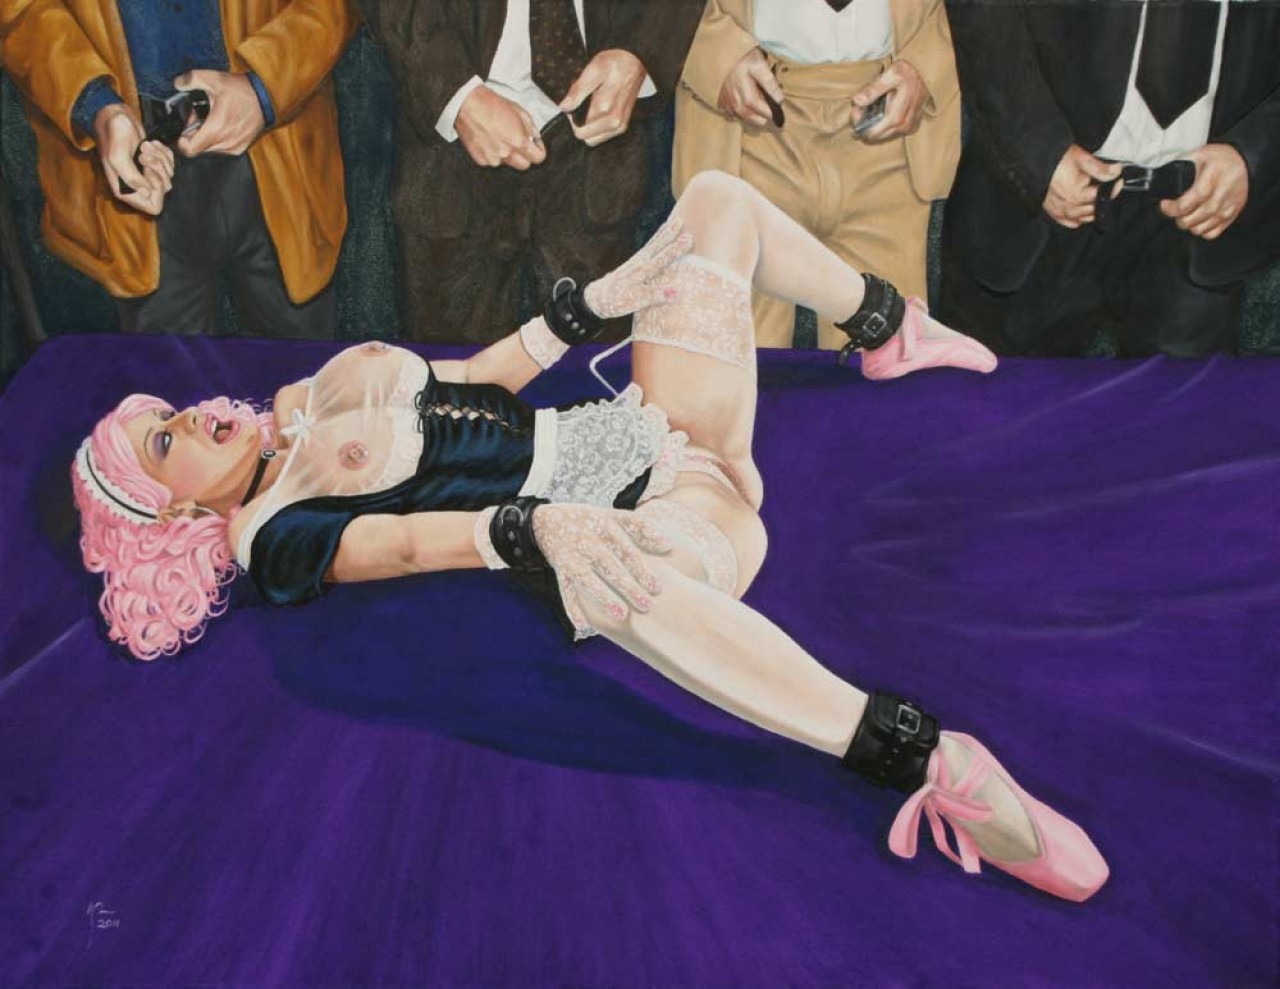 Maid for love - Oils on canvas, 60 x 80 cm, 2011